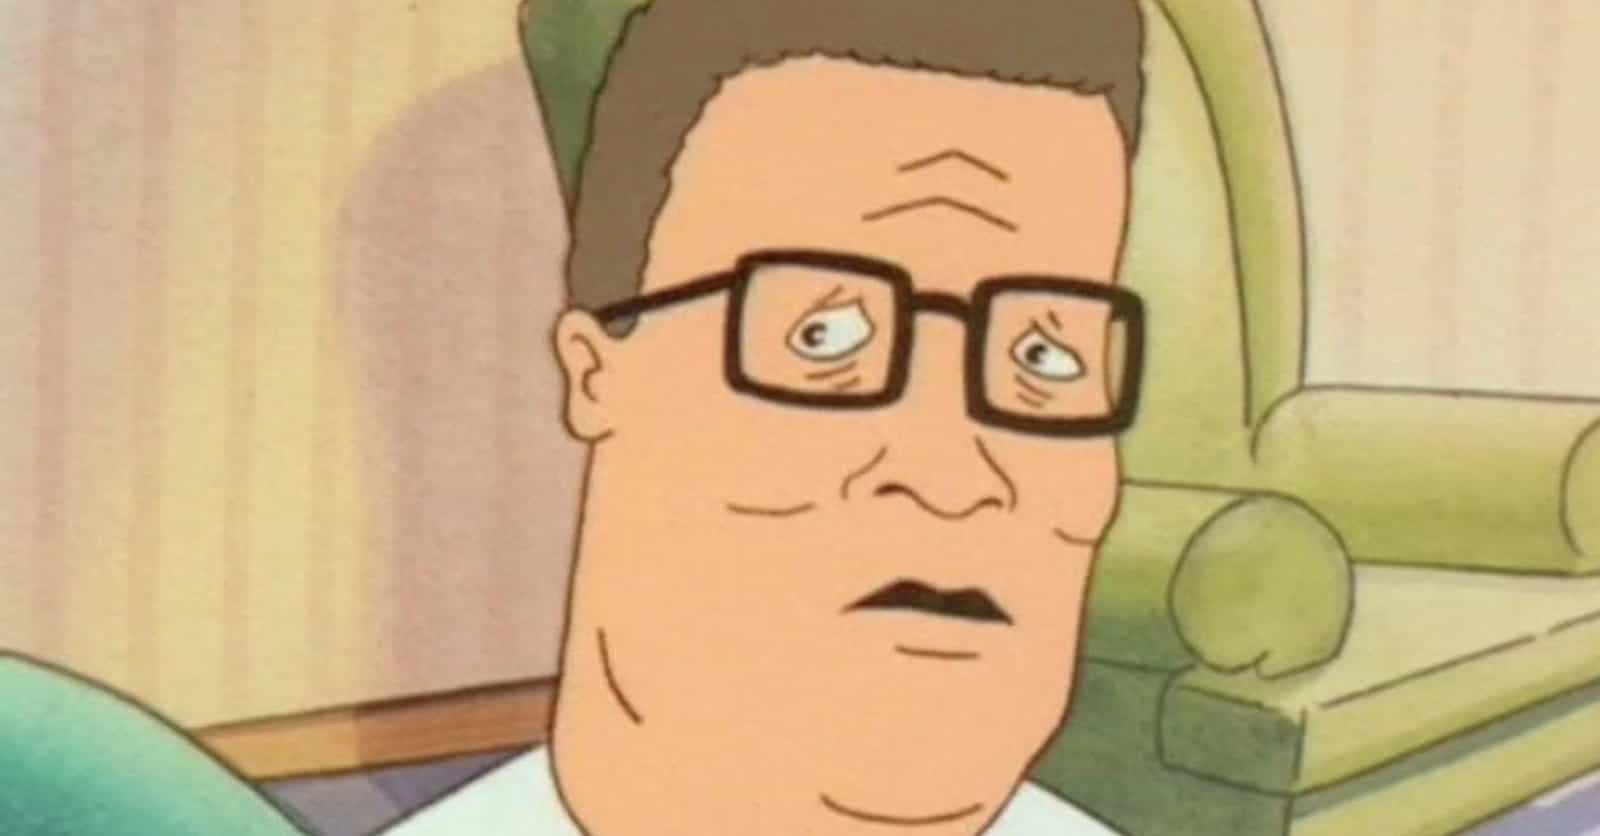 The Greatest Hank Hill Quotes Of All Time